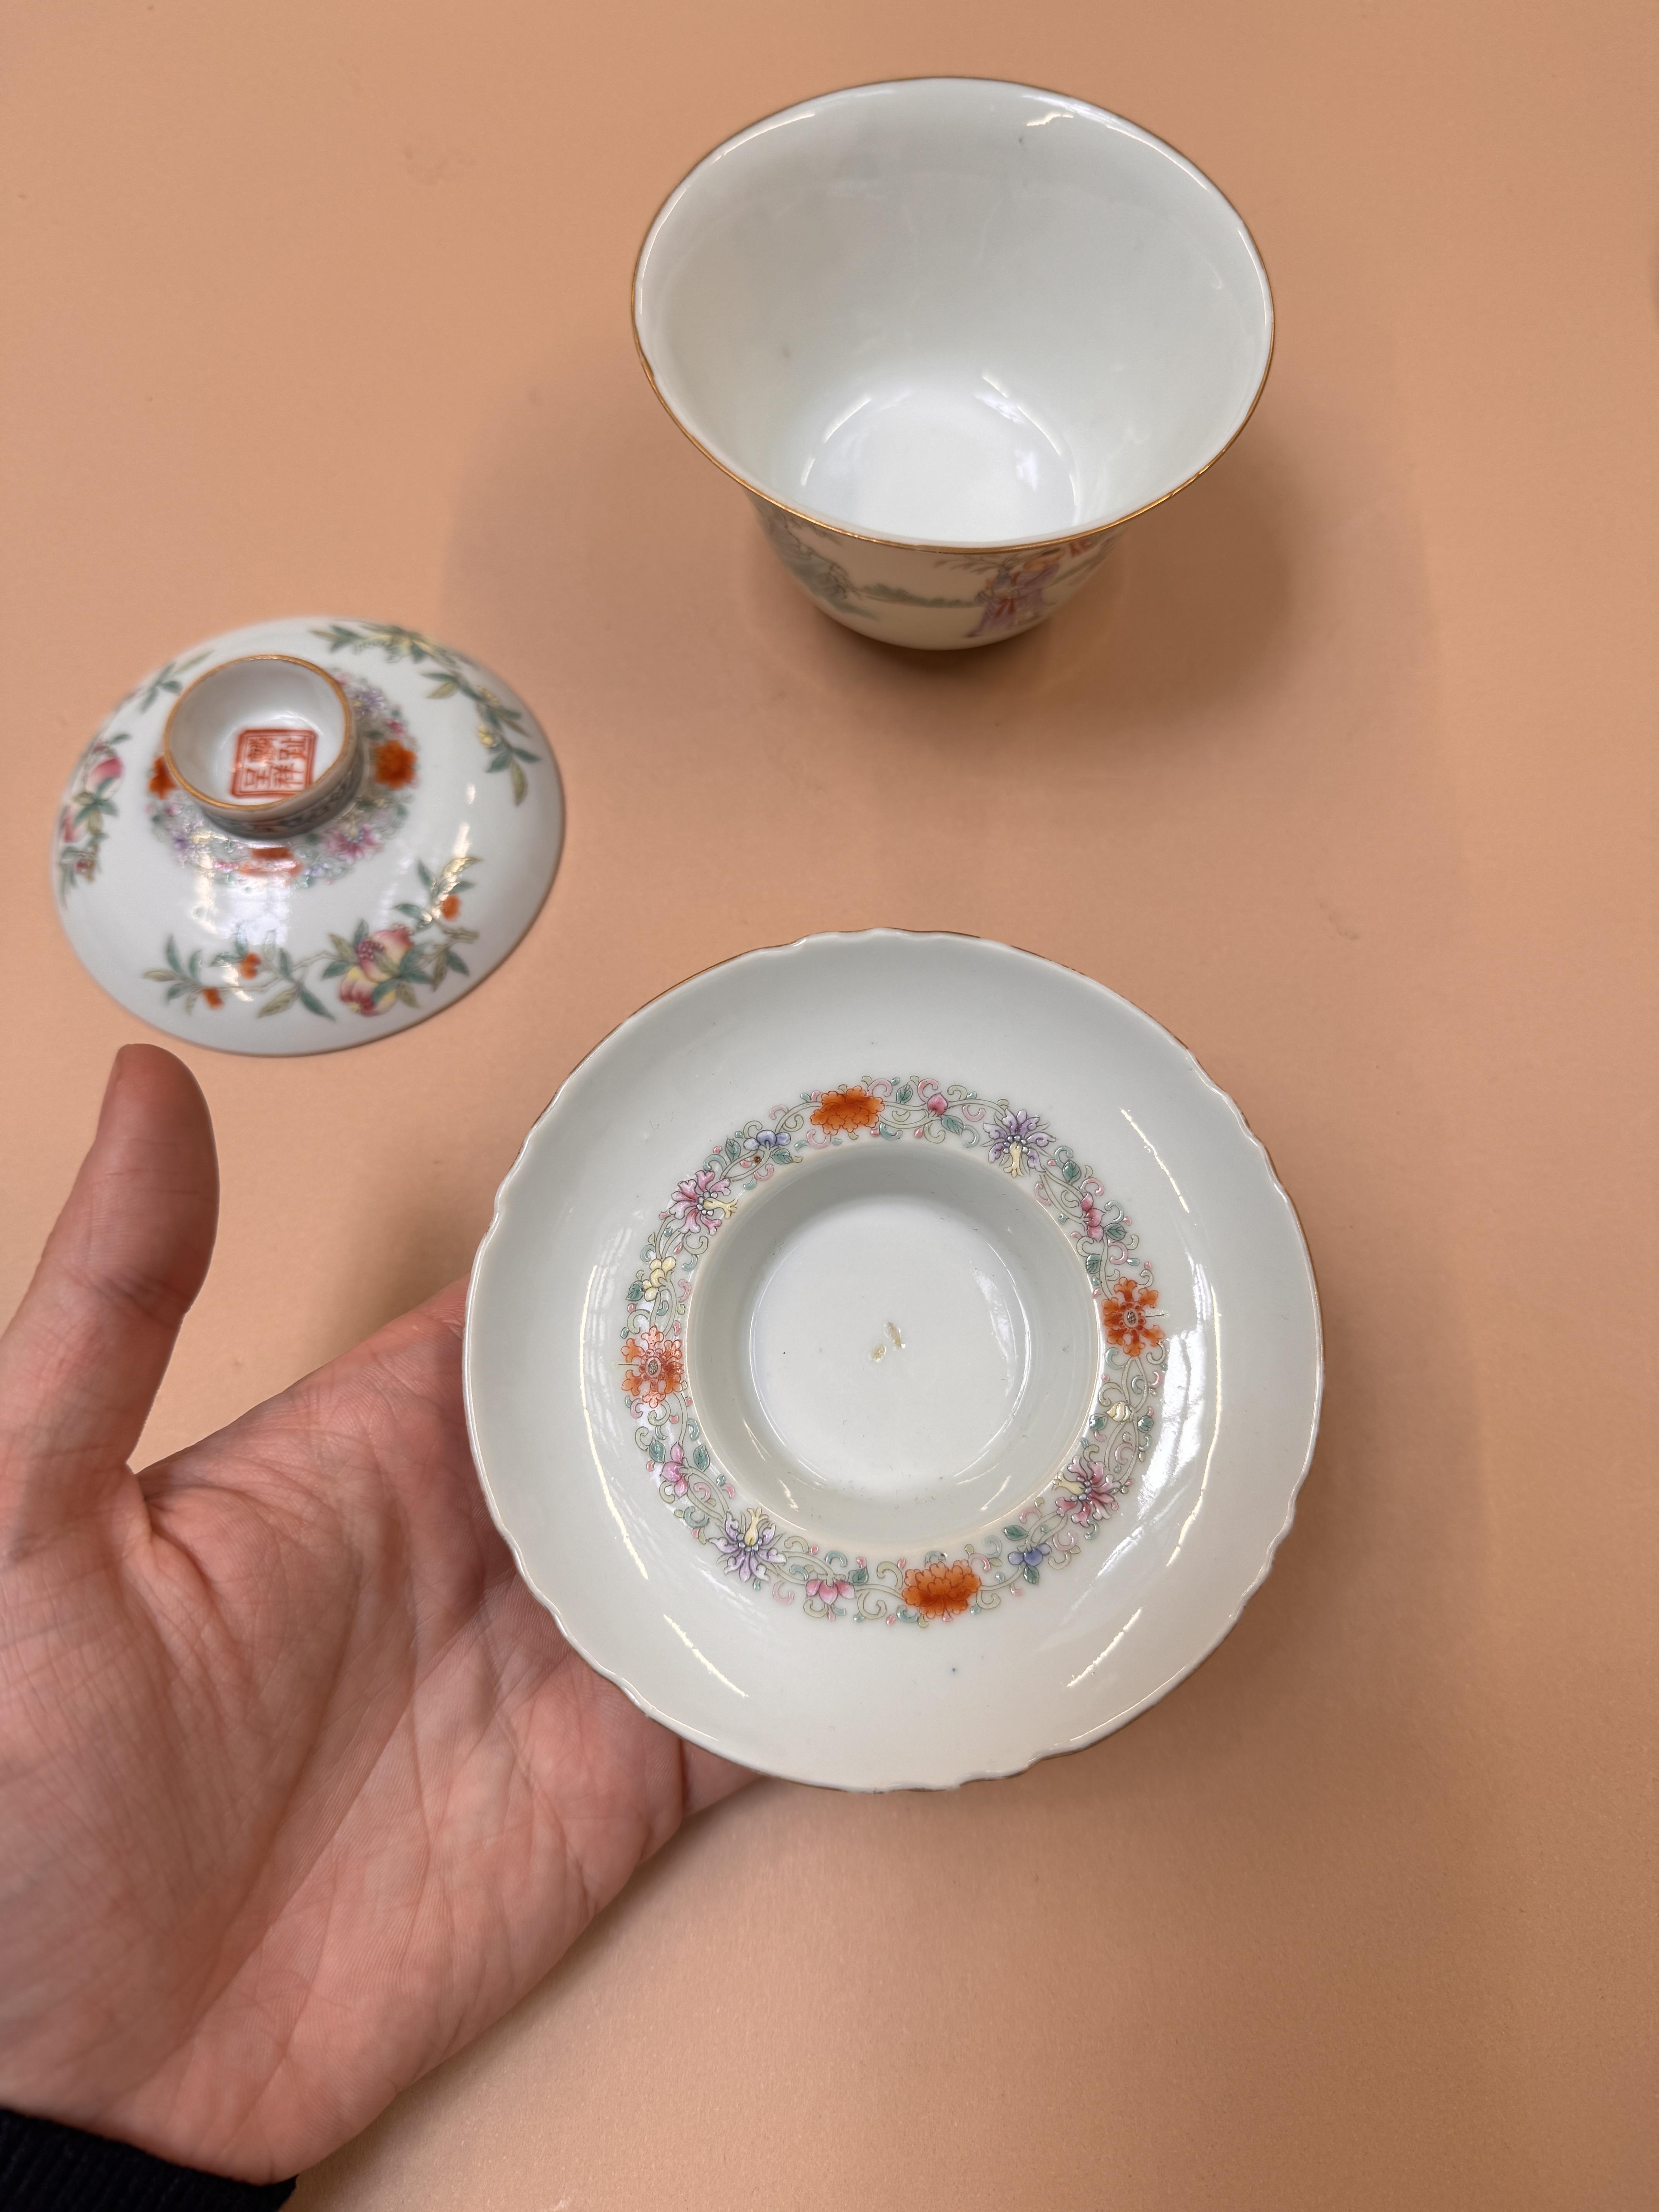 A PAIR OF CHINESE FAMILLE-ROSE CUPS, COVERS AND STANDS 民國時期 粉彩嬰戲圖蓋盌一對 《麟指呈祥》款 - Image 37 of 44